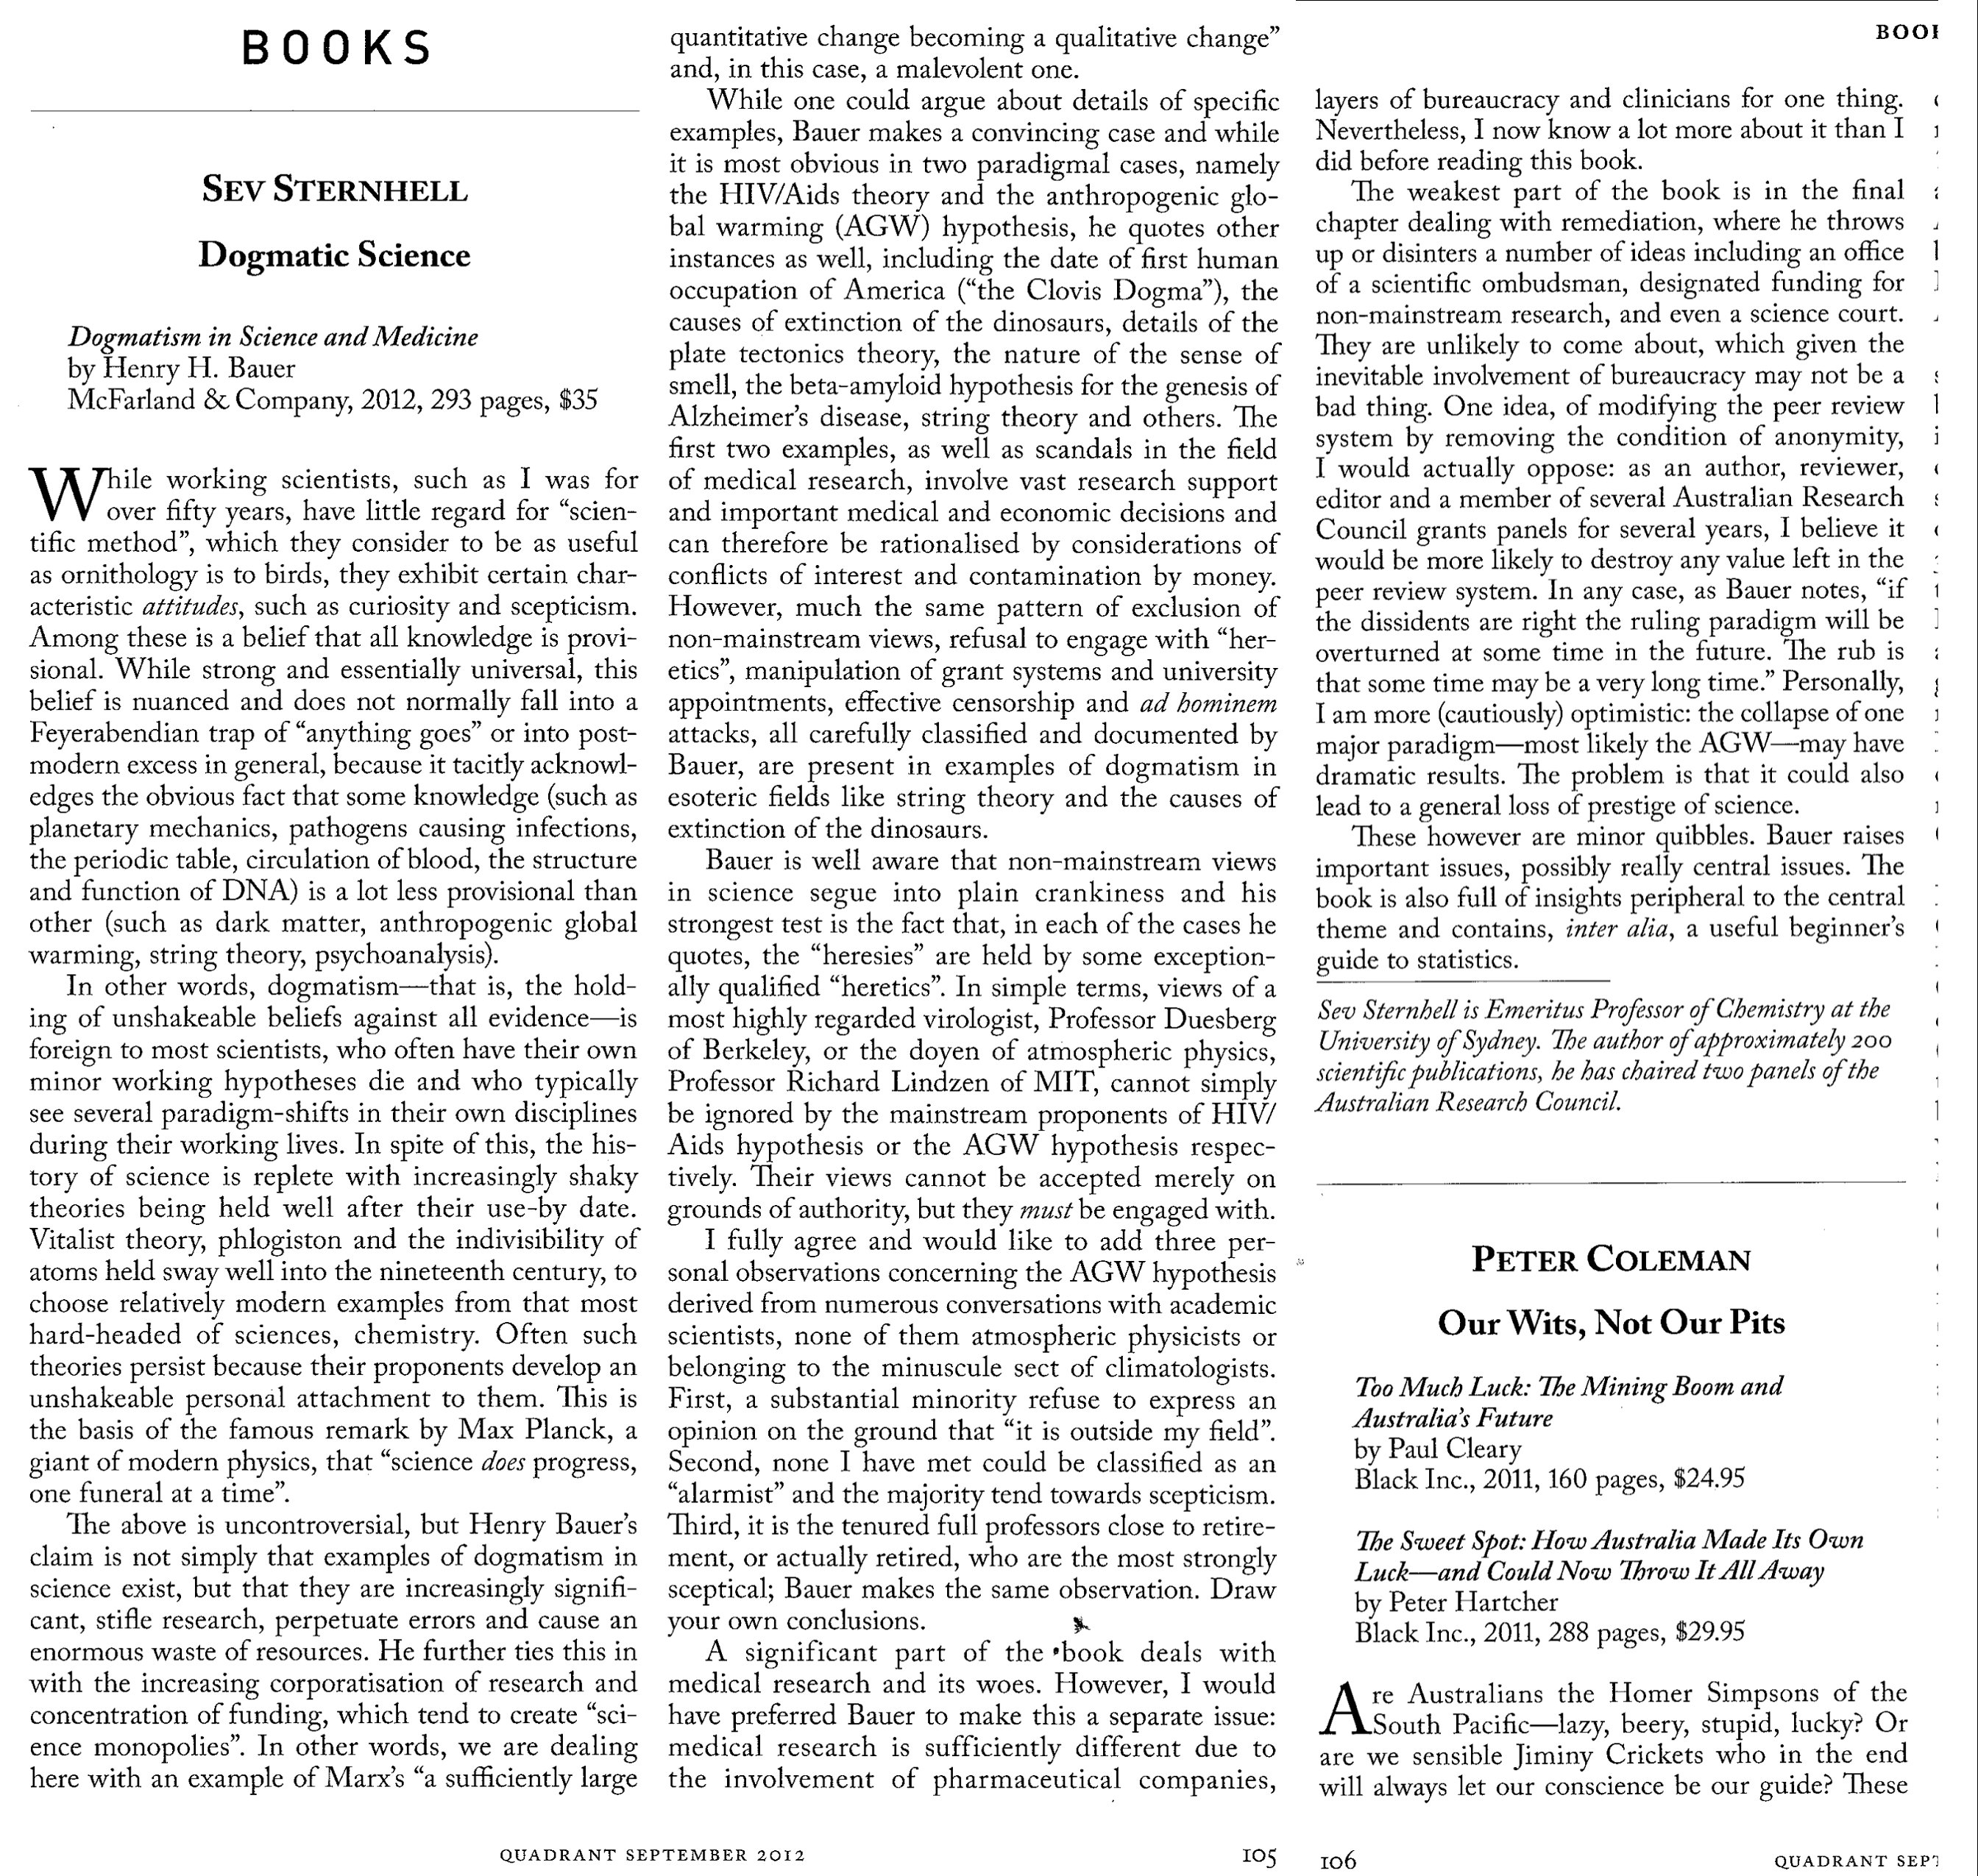 Example of a book review paper